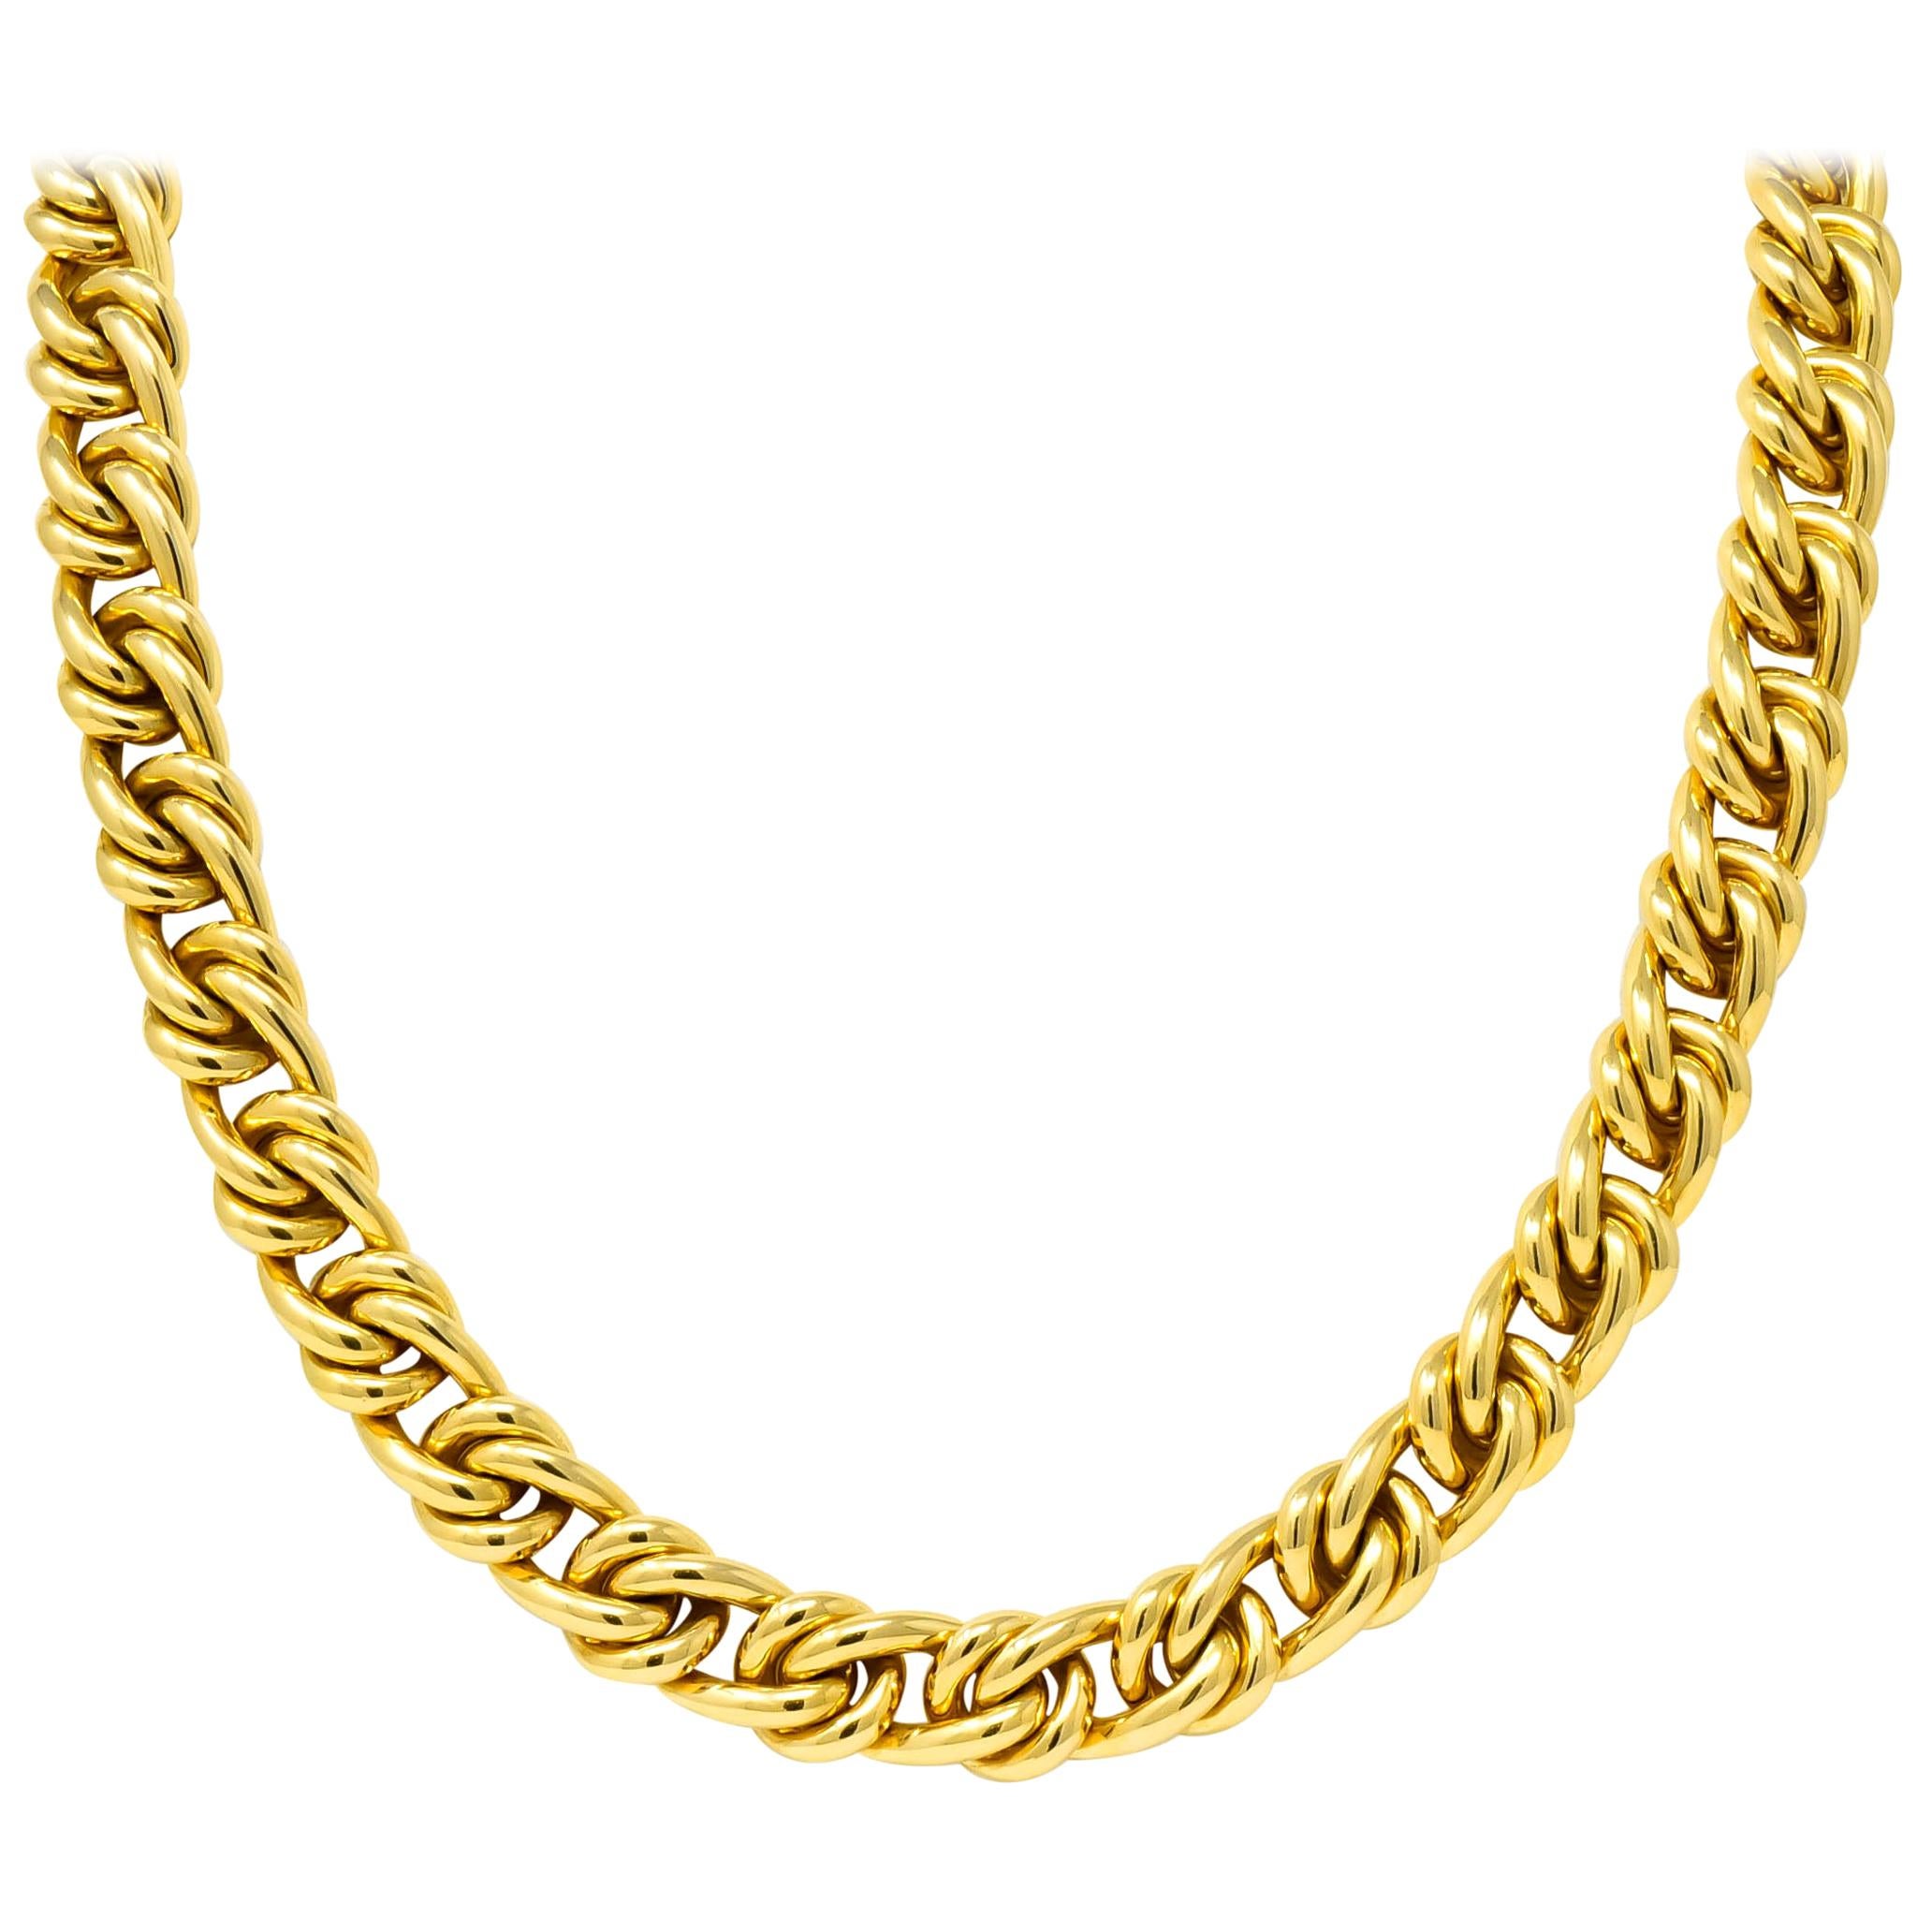 Tiffany & Co. Vintage 18 Karat Yellow Gold Curbed Link Necklace